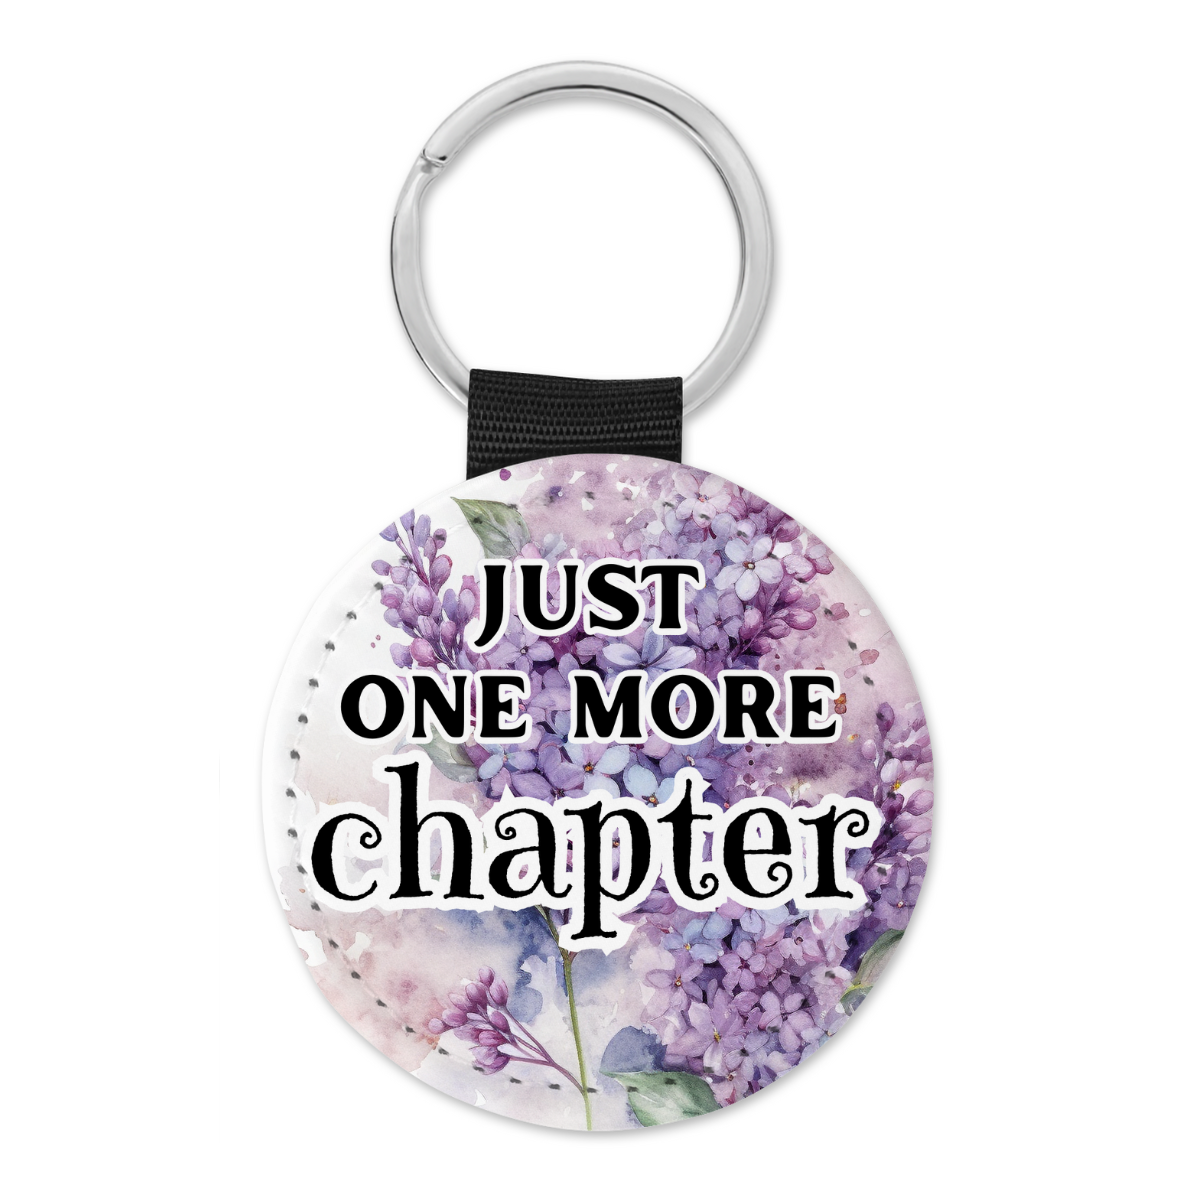 Just One More Chapter | Book Lovers Keyring - The Pretty Things.ca